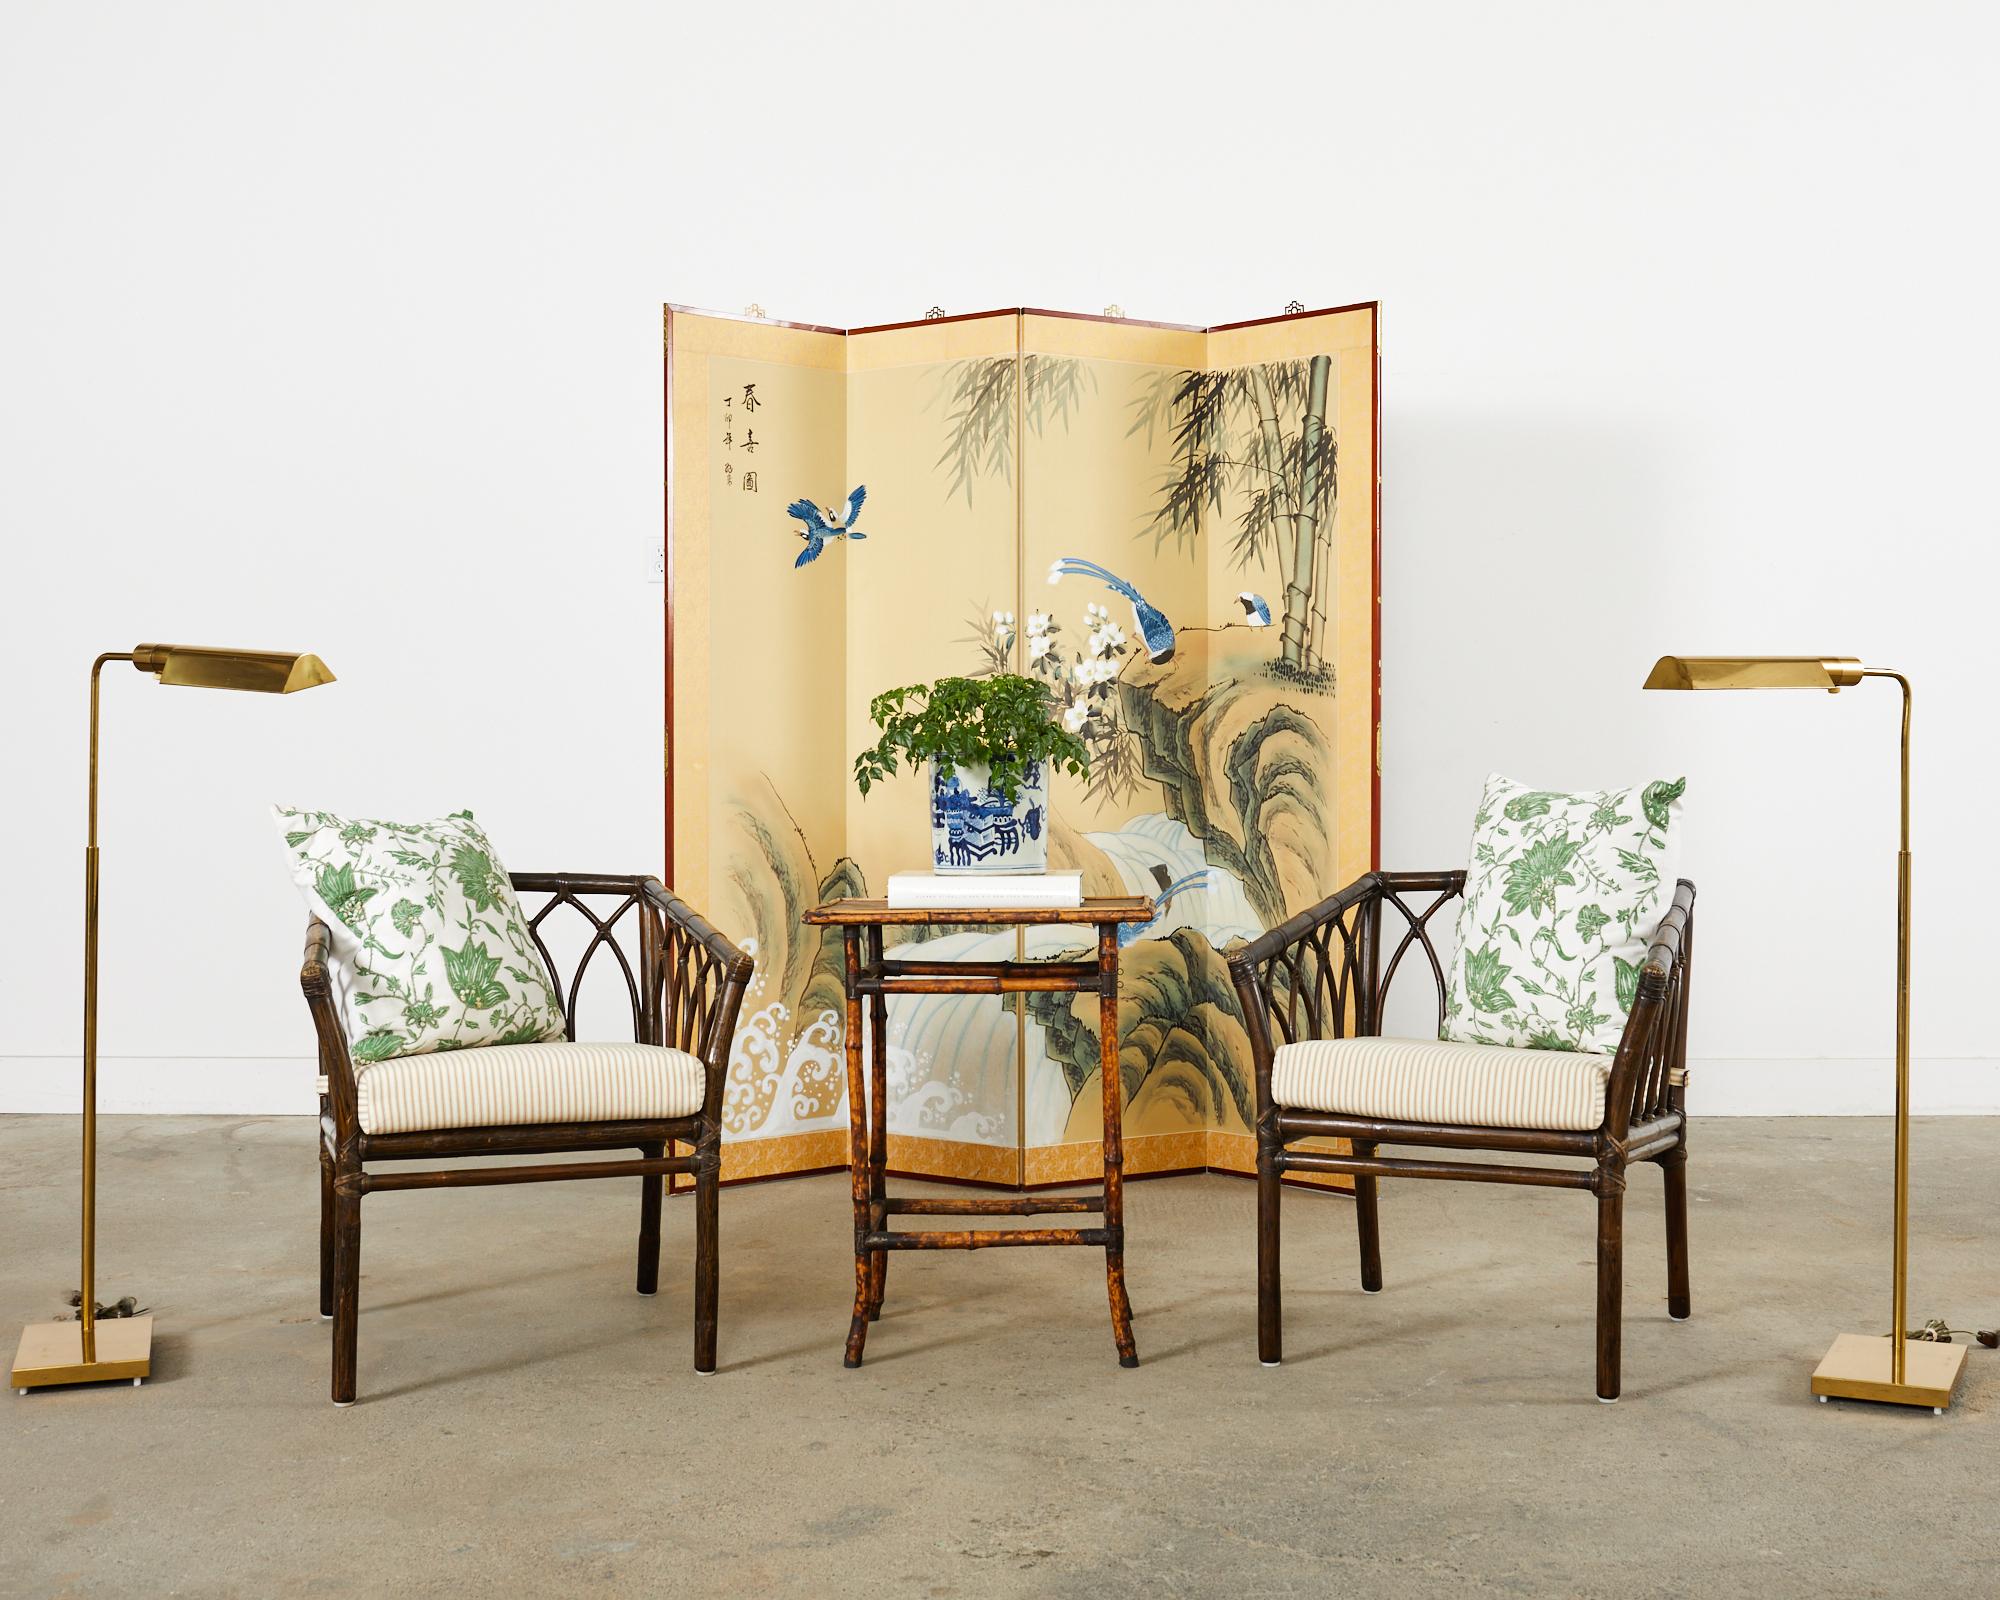 Large Chinese four panel Japanese style byobu folding screen depicting a waterfall landscape. The scene is decorated with bamboo, colorful blue magpies, and crashing waves. Constructed with ink and natural colored pigments on paper and set in a wood